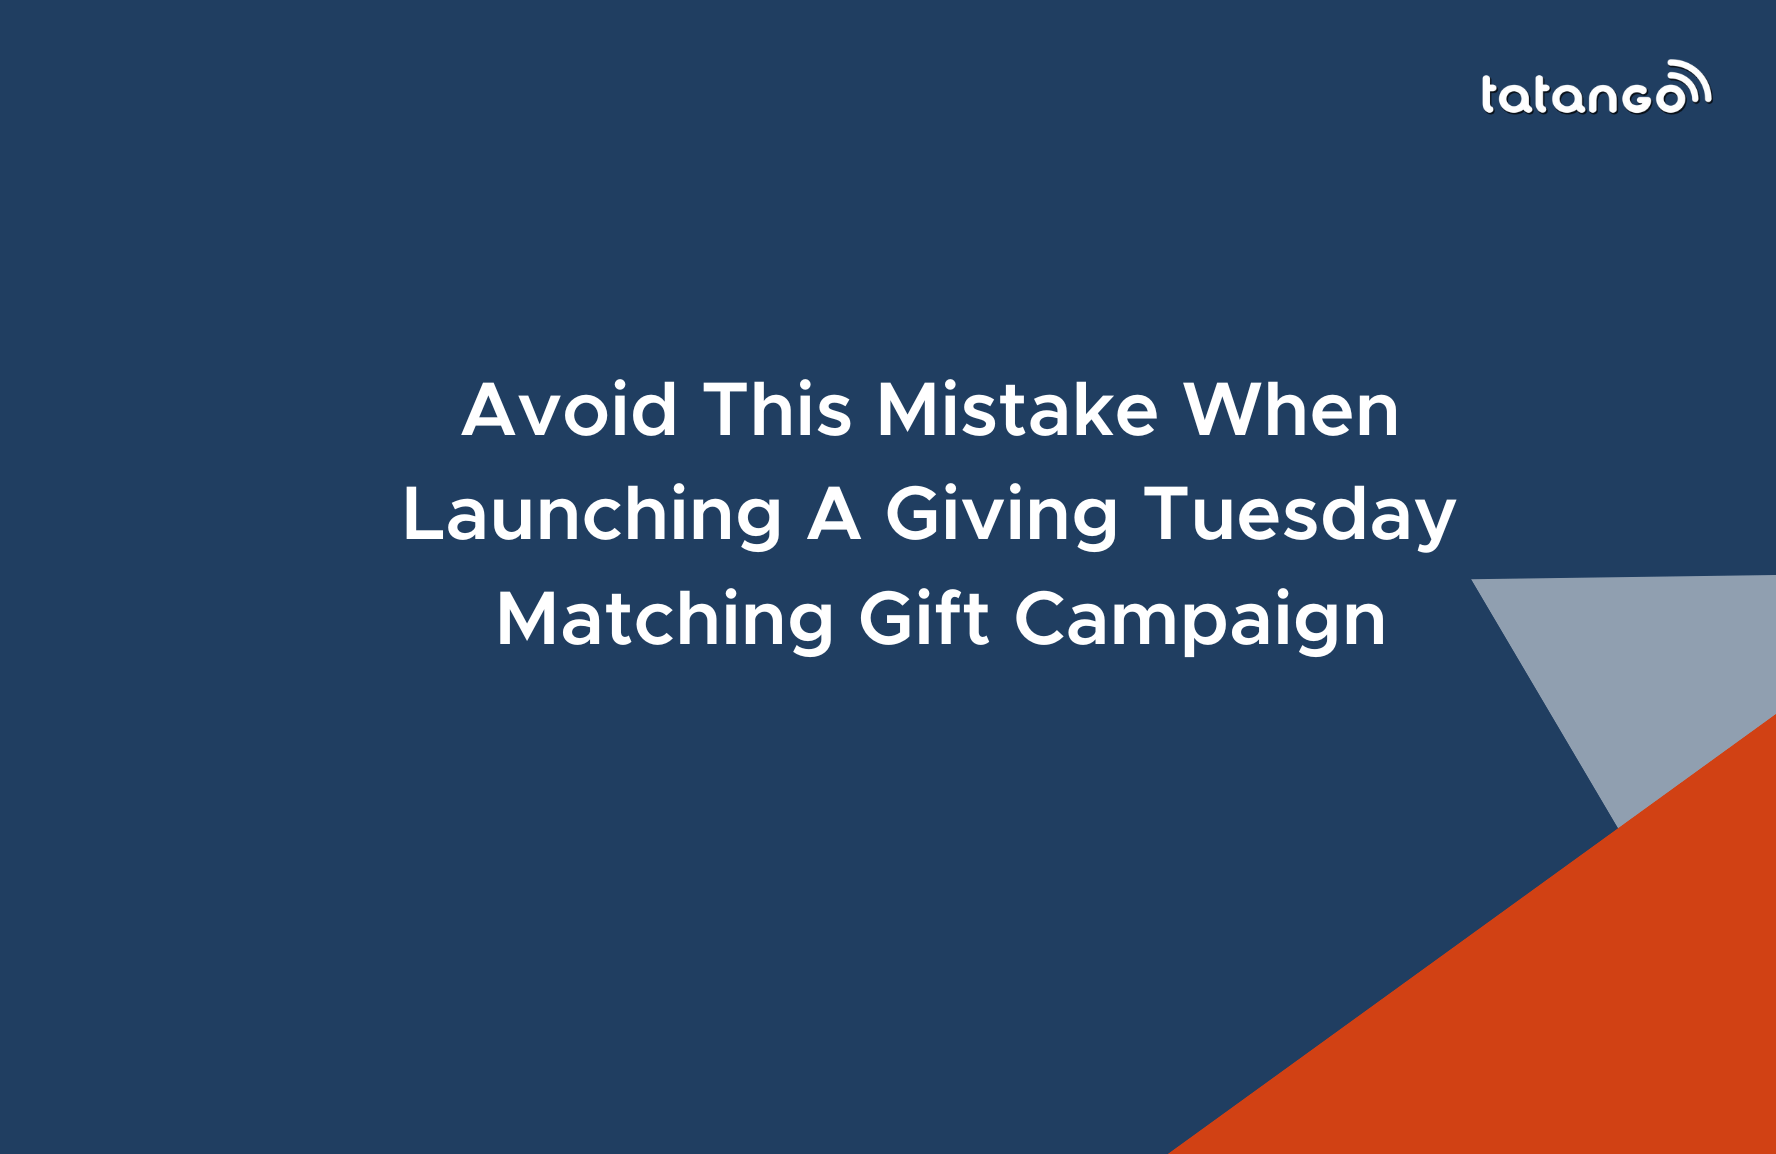 Avoid This Mistake When Launching an SMS Giving Tuesday Matching Gift Campaign